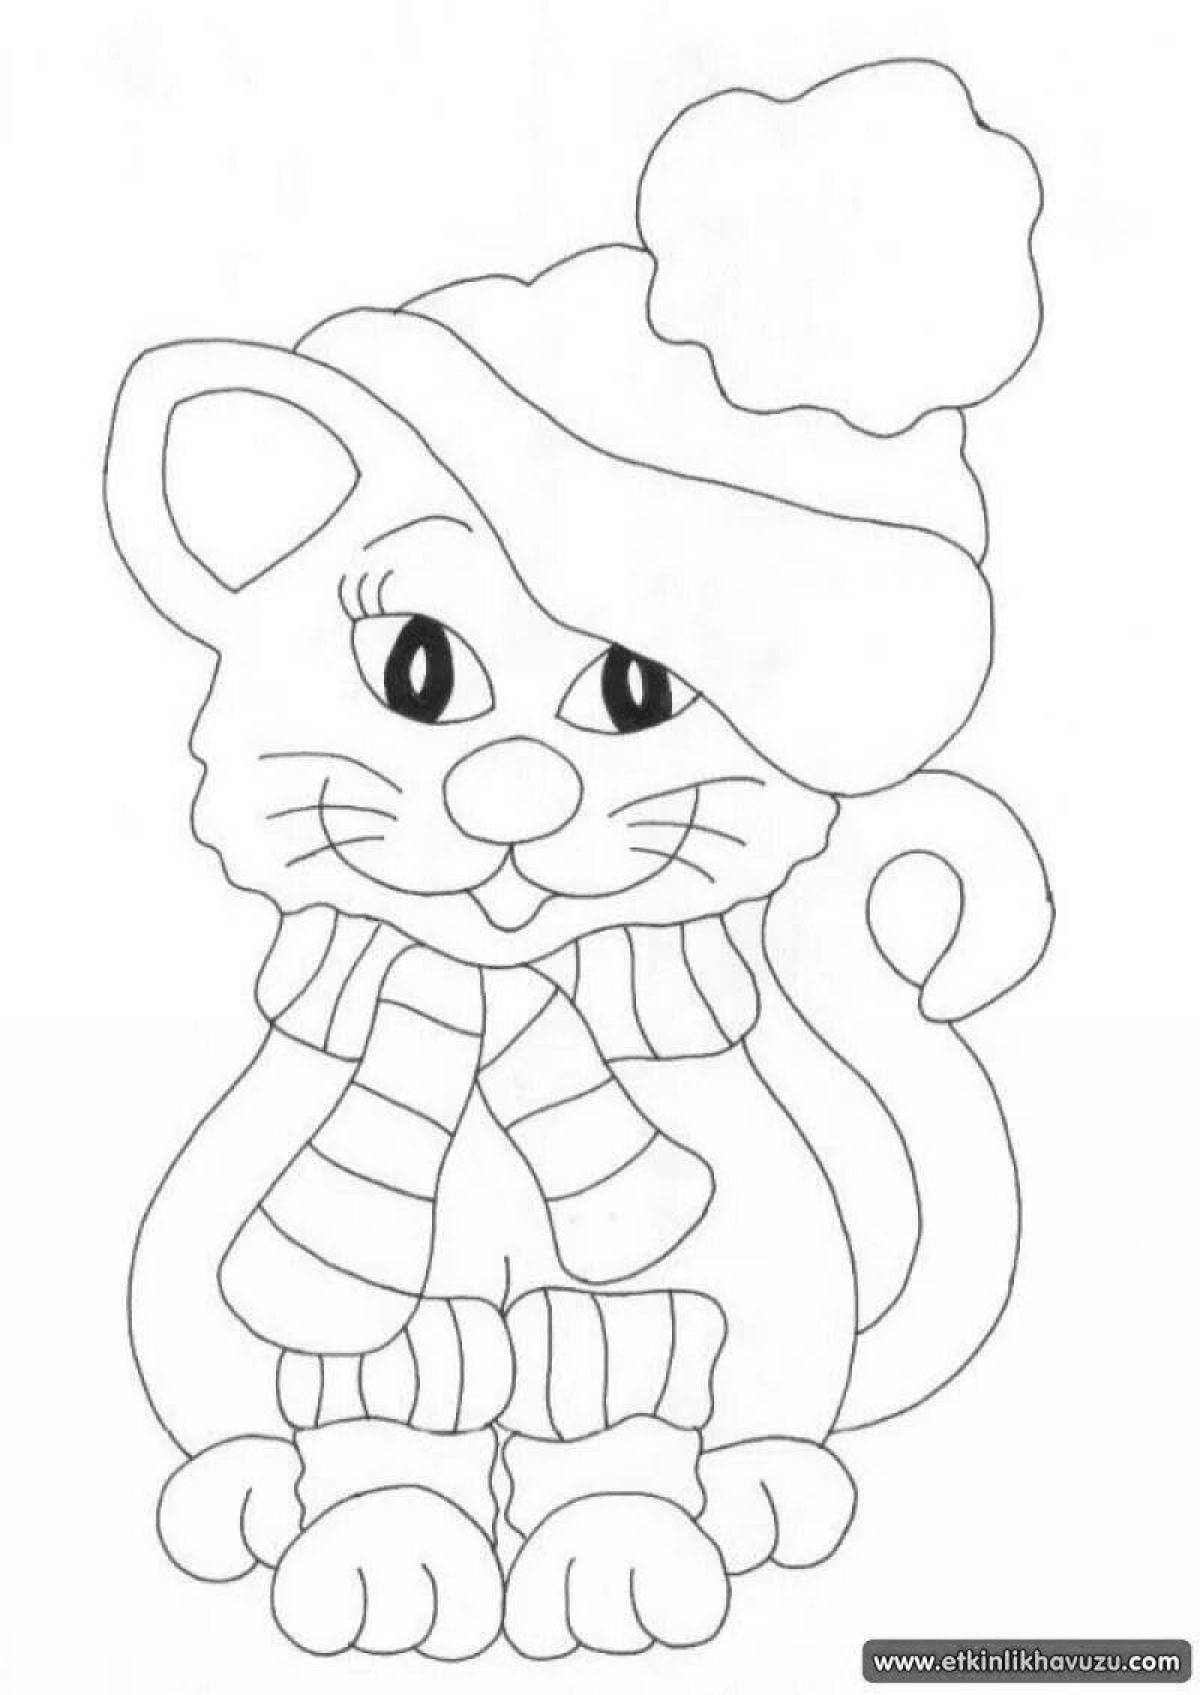 Coloring page playful cat in a hat